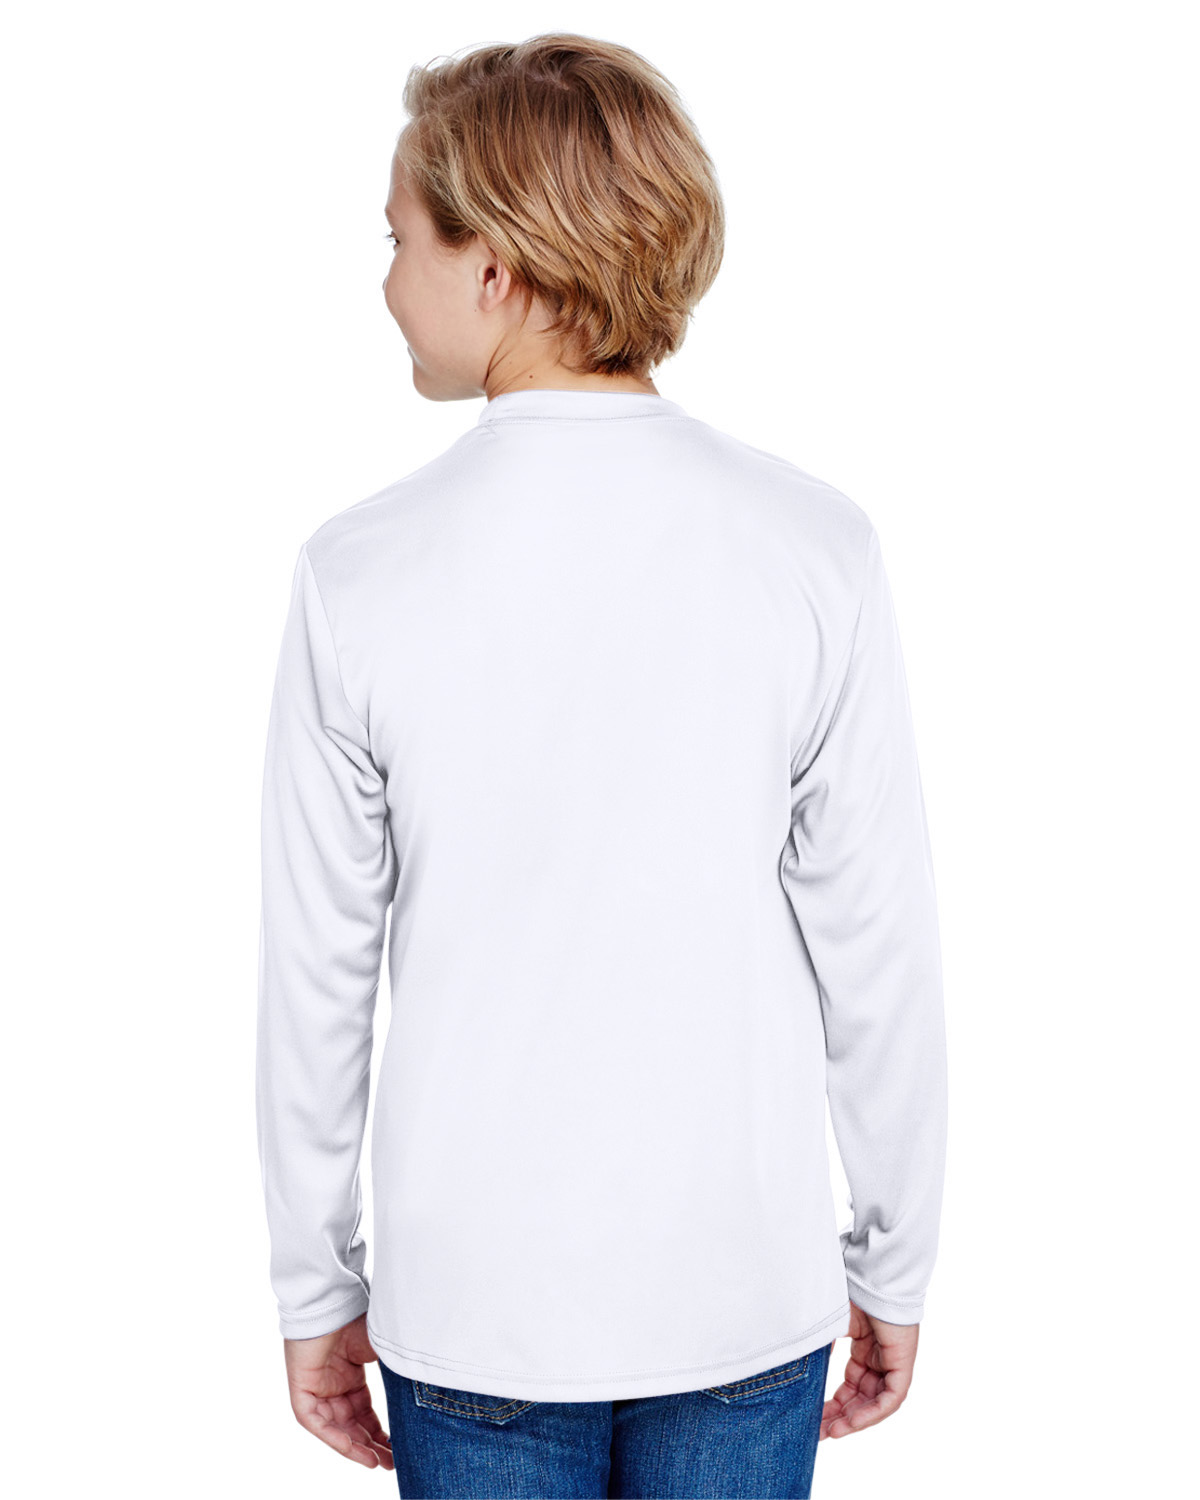 A4 Nb3165 Youth Long Sleeve Cooling Performance Crew Shirt | Jiffy 